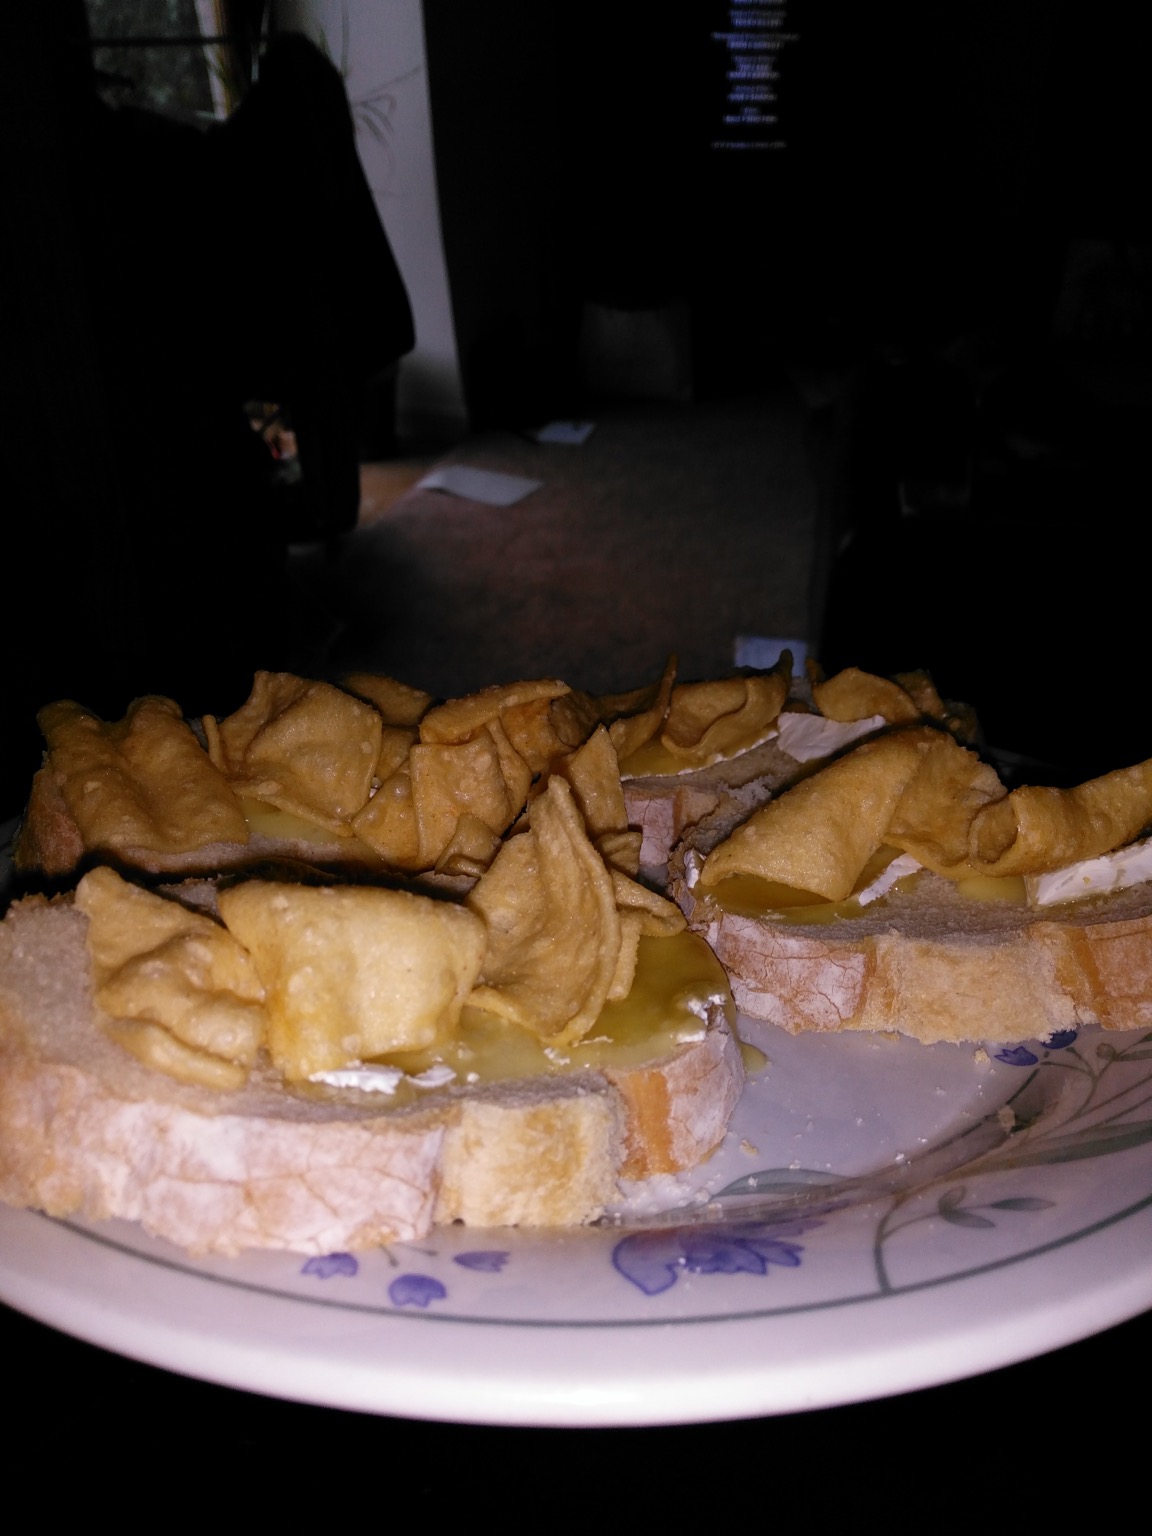 Flash photo of corn snacks and brie on sliced bread